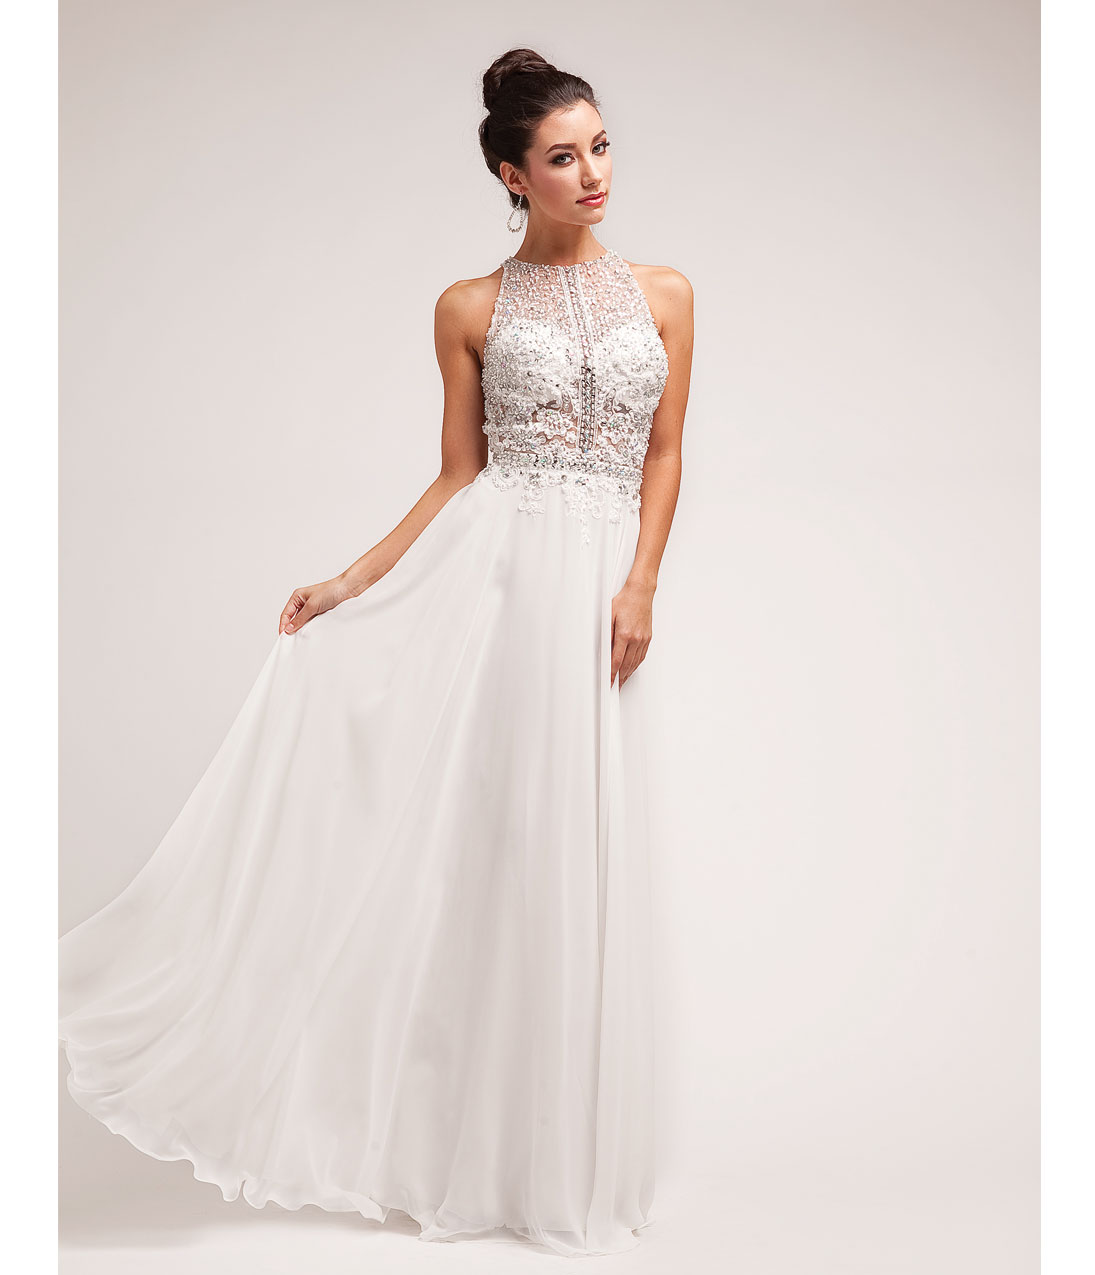 Change your style with glamorous look by White formal dresses